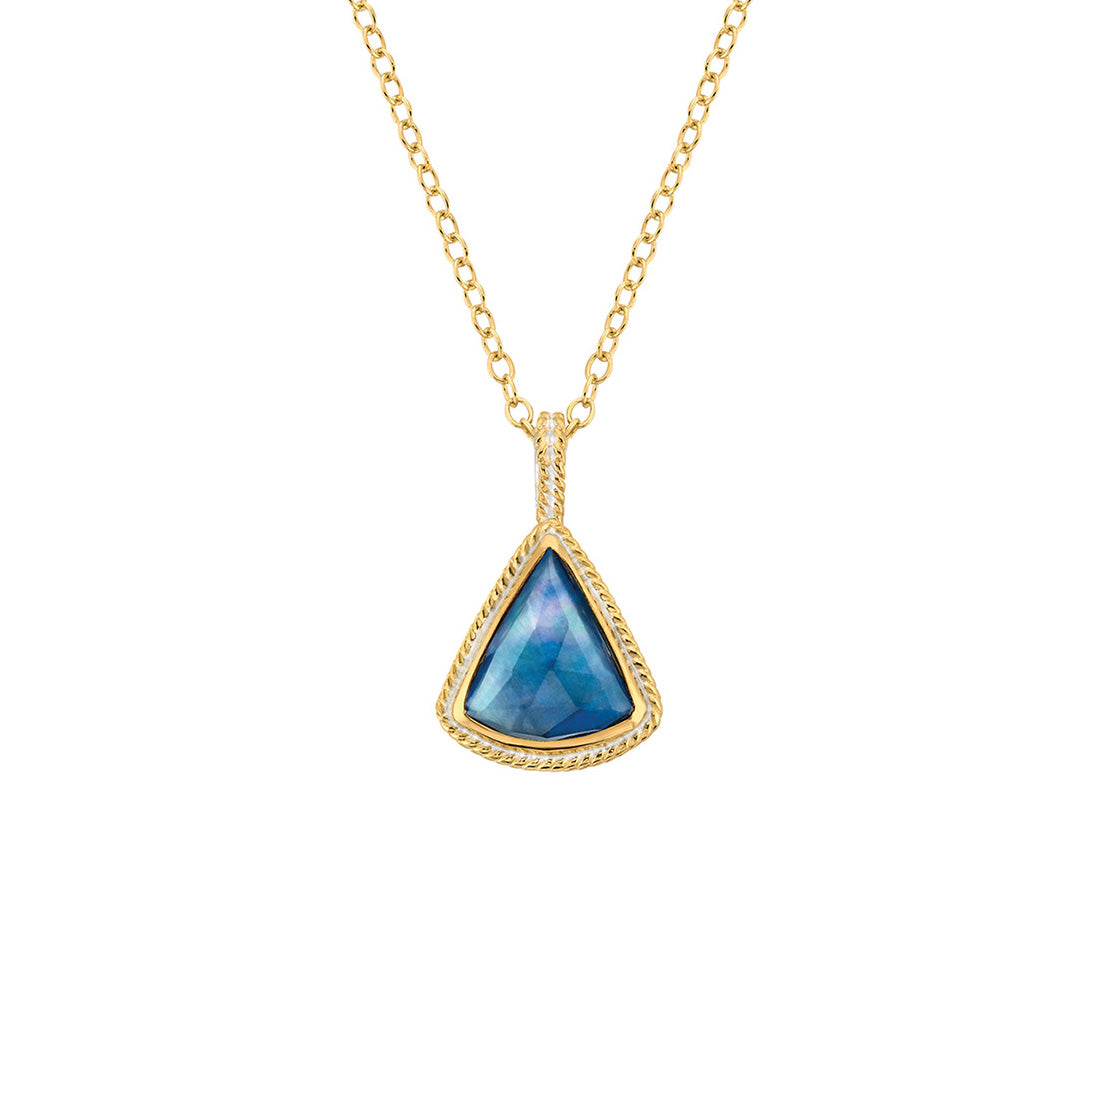 Ana Beck 18k gold plated and sterling silver Lapis Triangle Drop Necklace - Gold